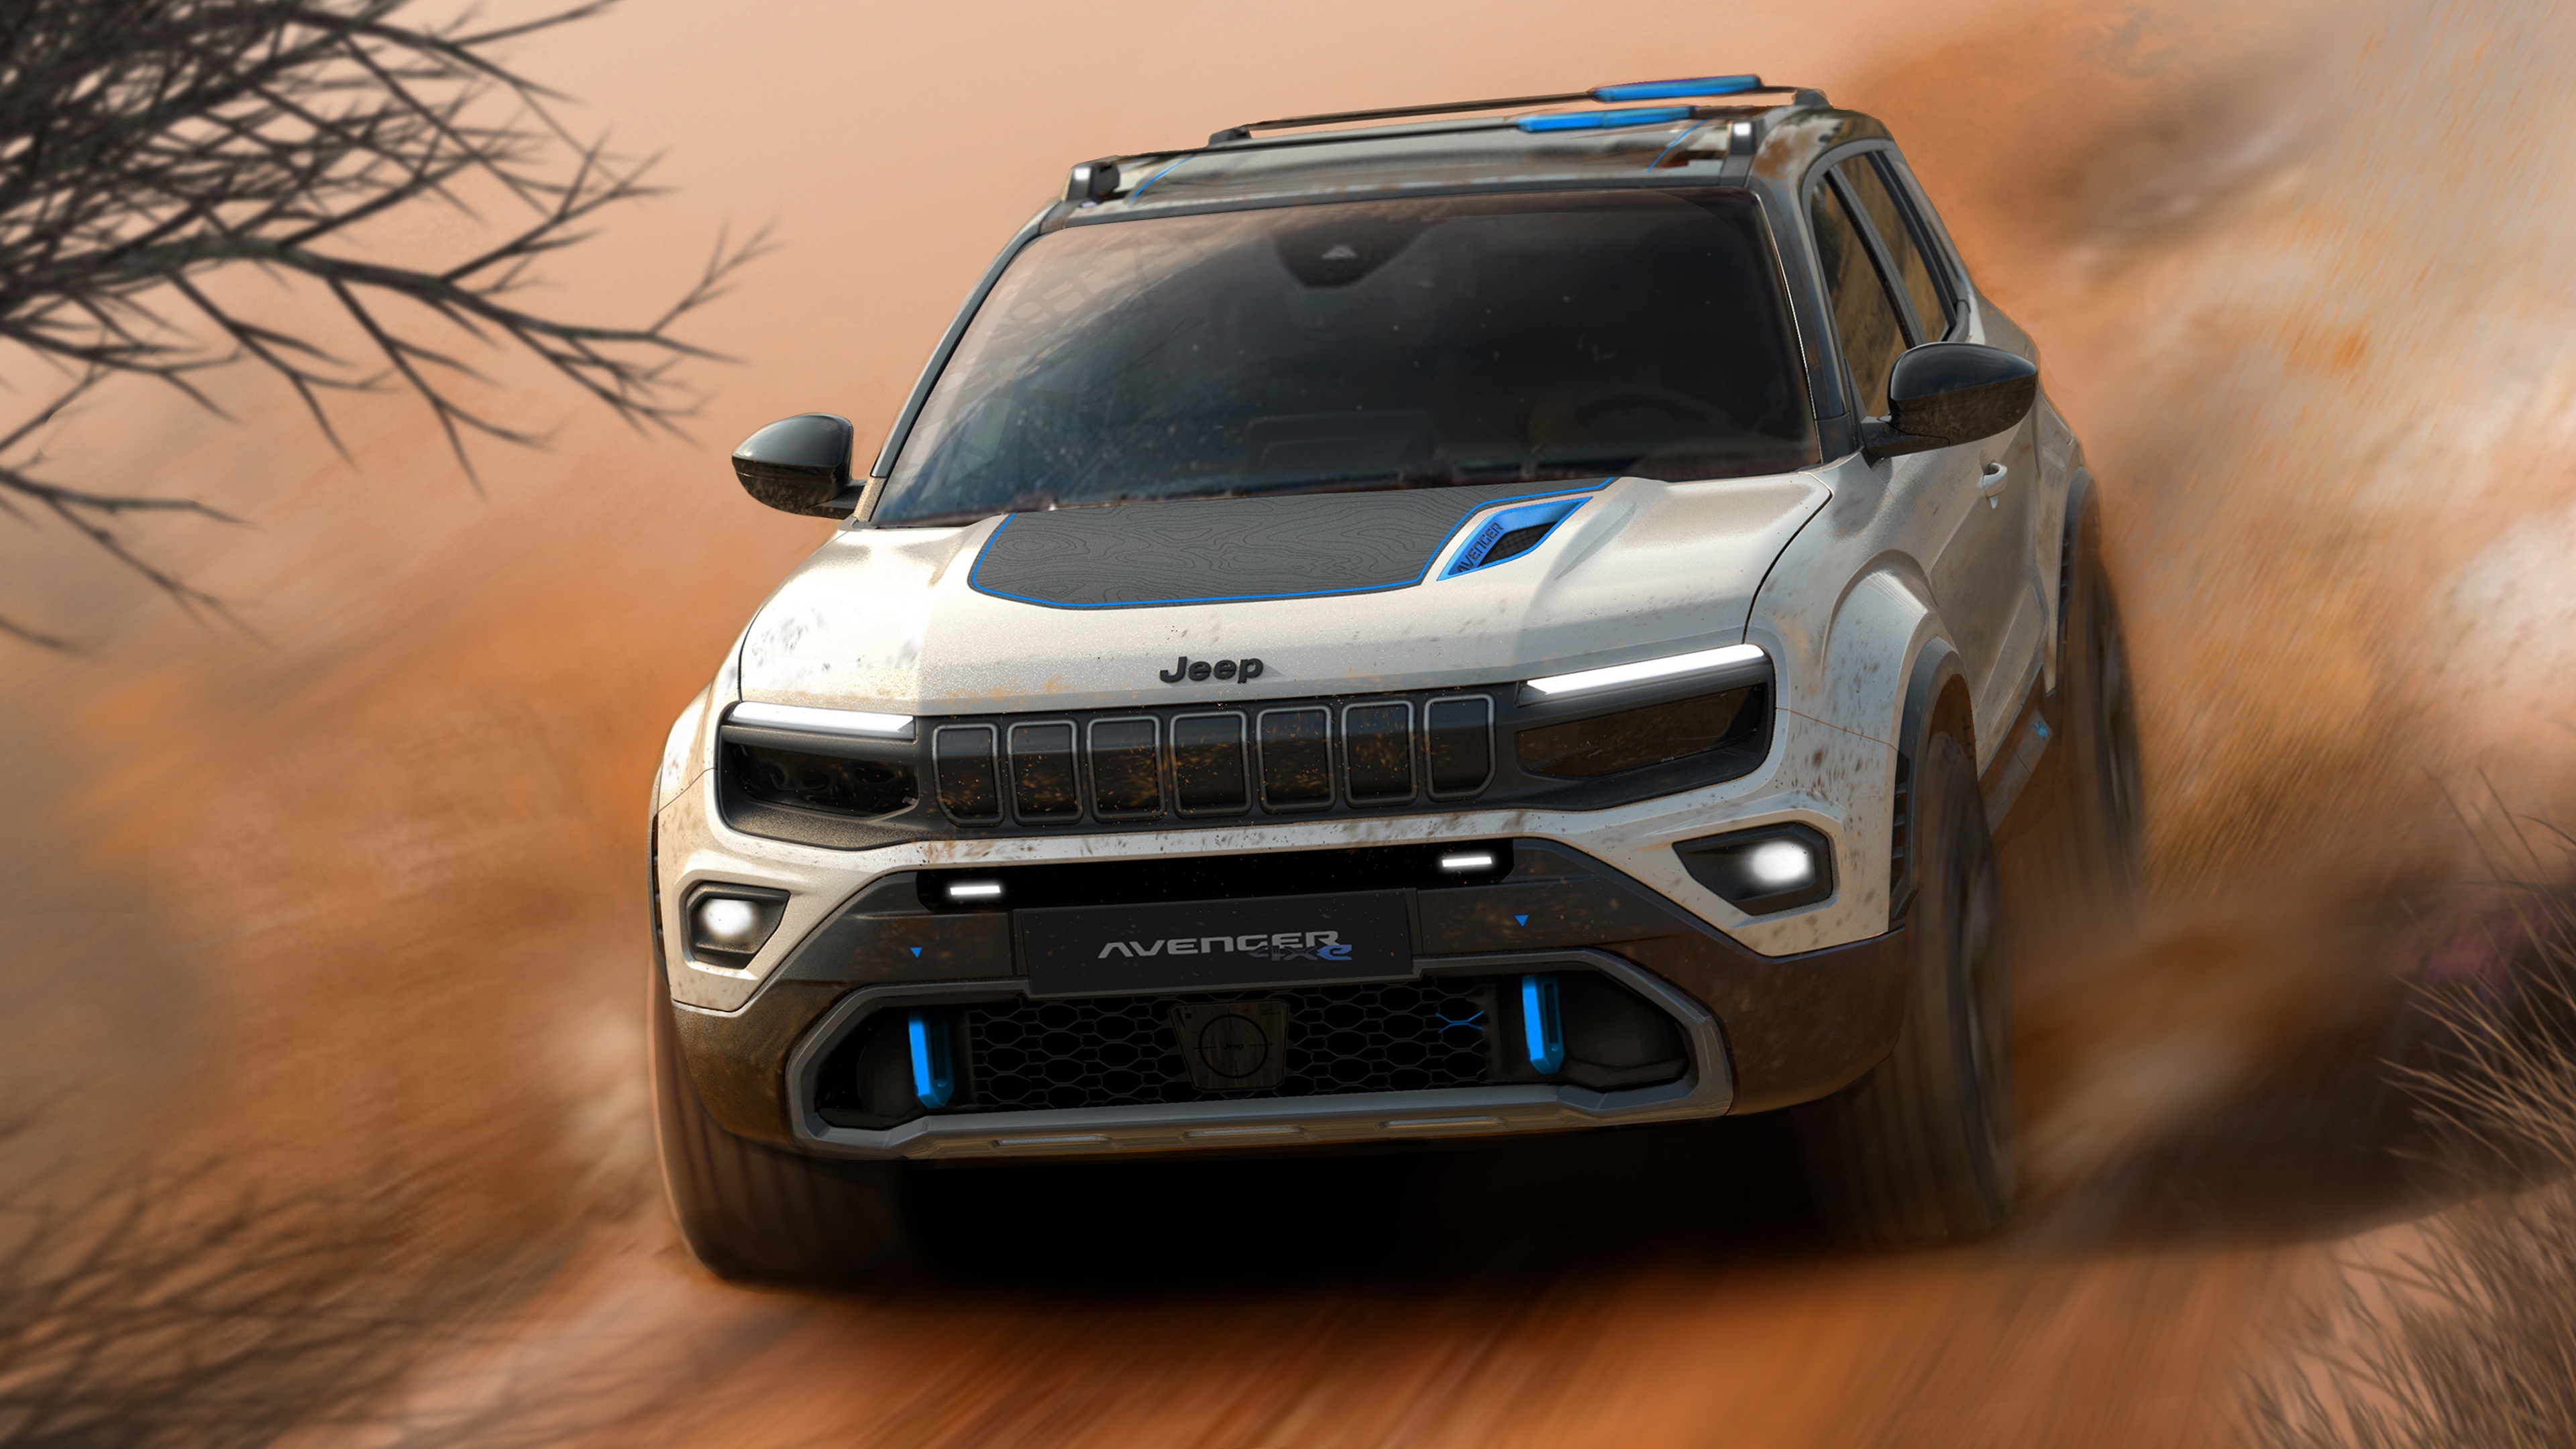 HD wallpaper, Off Road Suv, Jeep Avenger 4X4 Concept, Off Roading, 2022